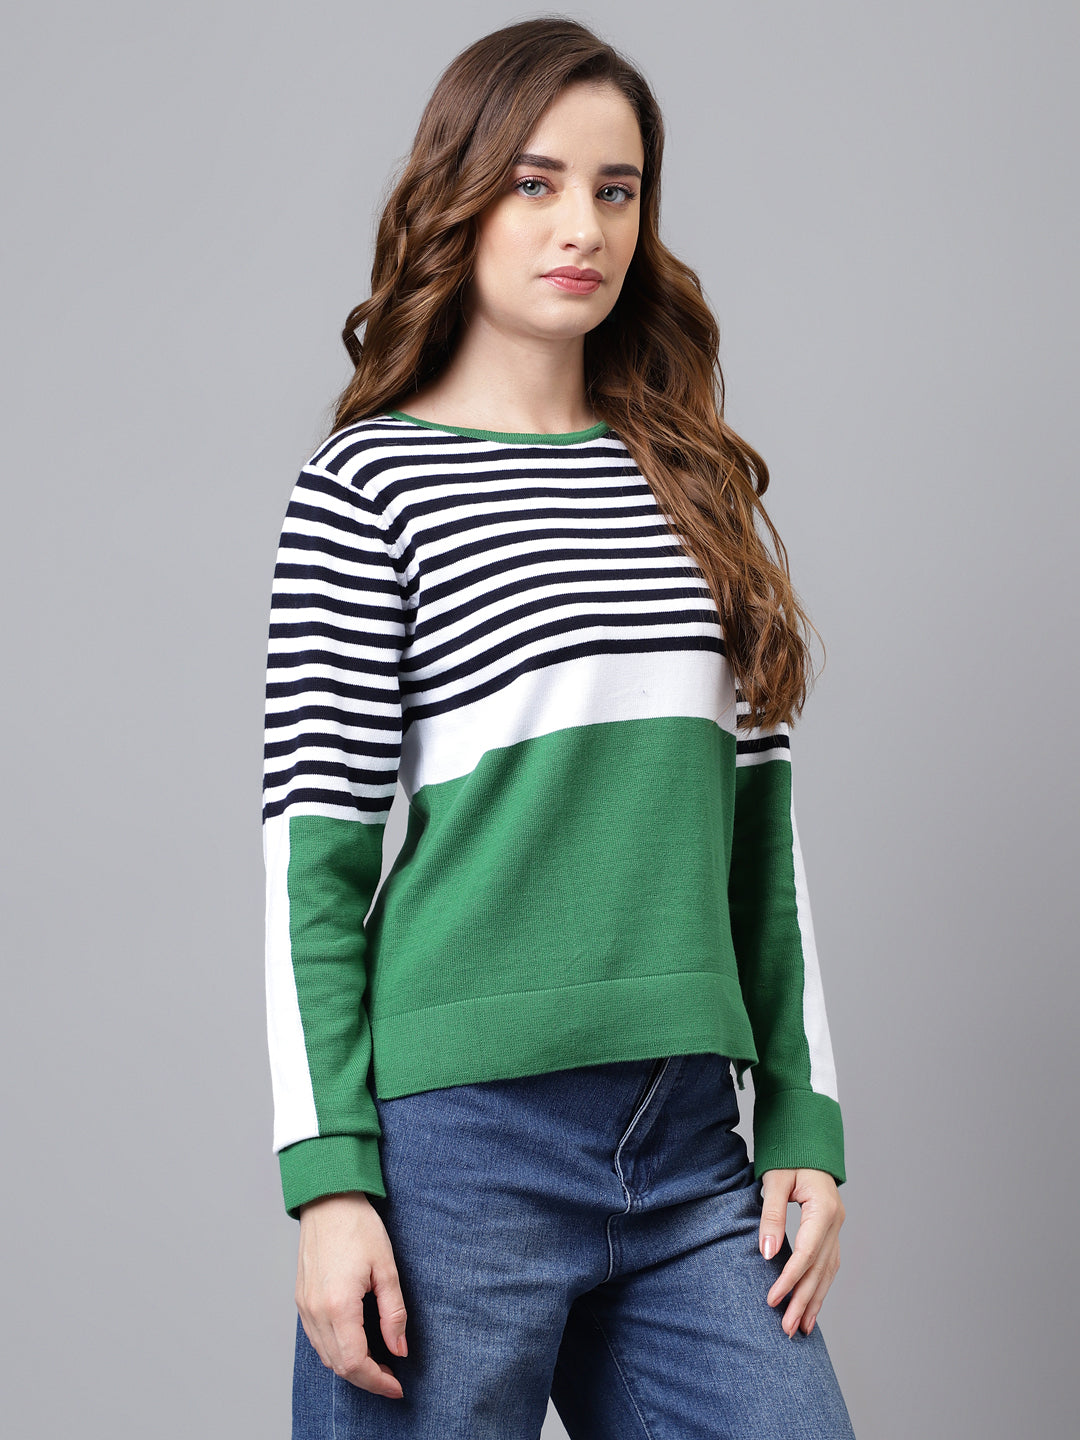 Green Full Sleeve Solid Pullover Women Sweater Top for Casual